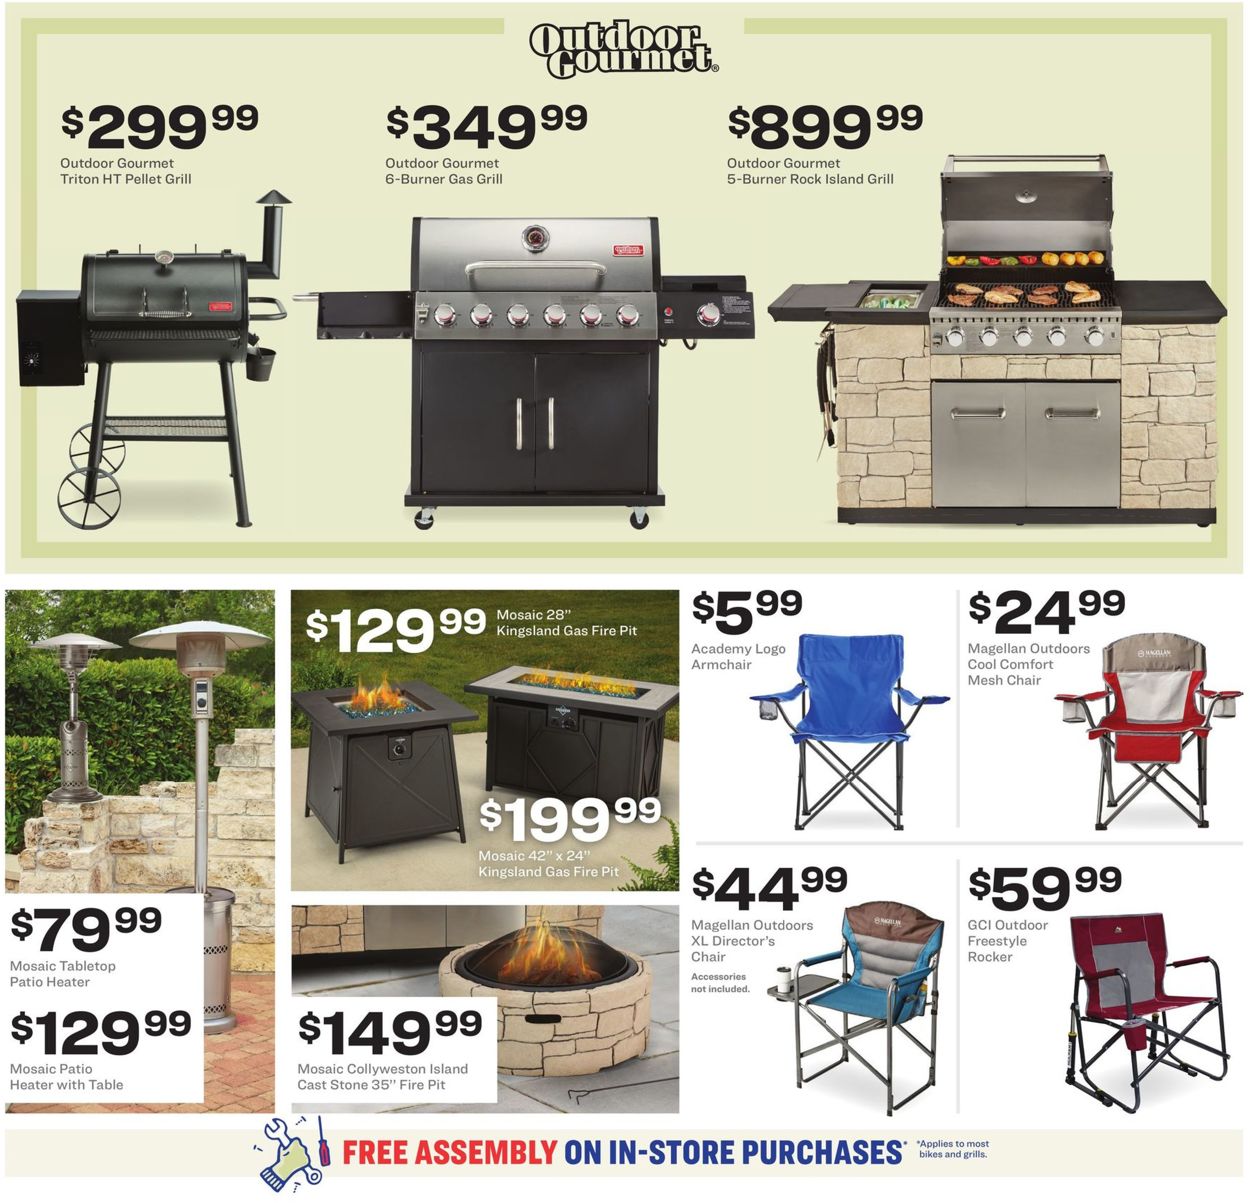 Academy Sports Current Weekly Ad 1026 - 11012020 9 - Frequent-adscom